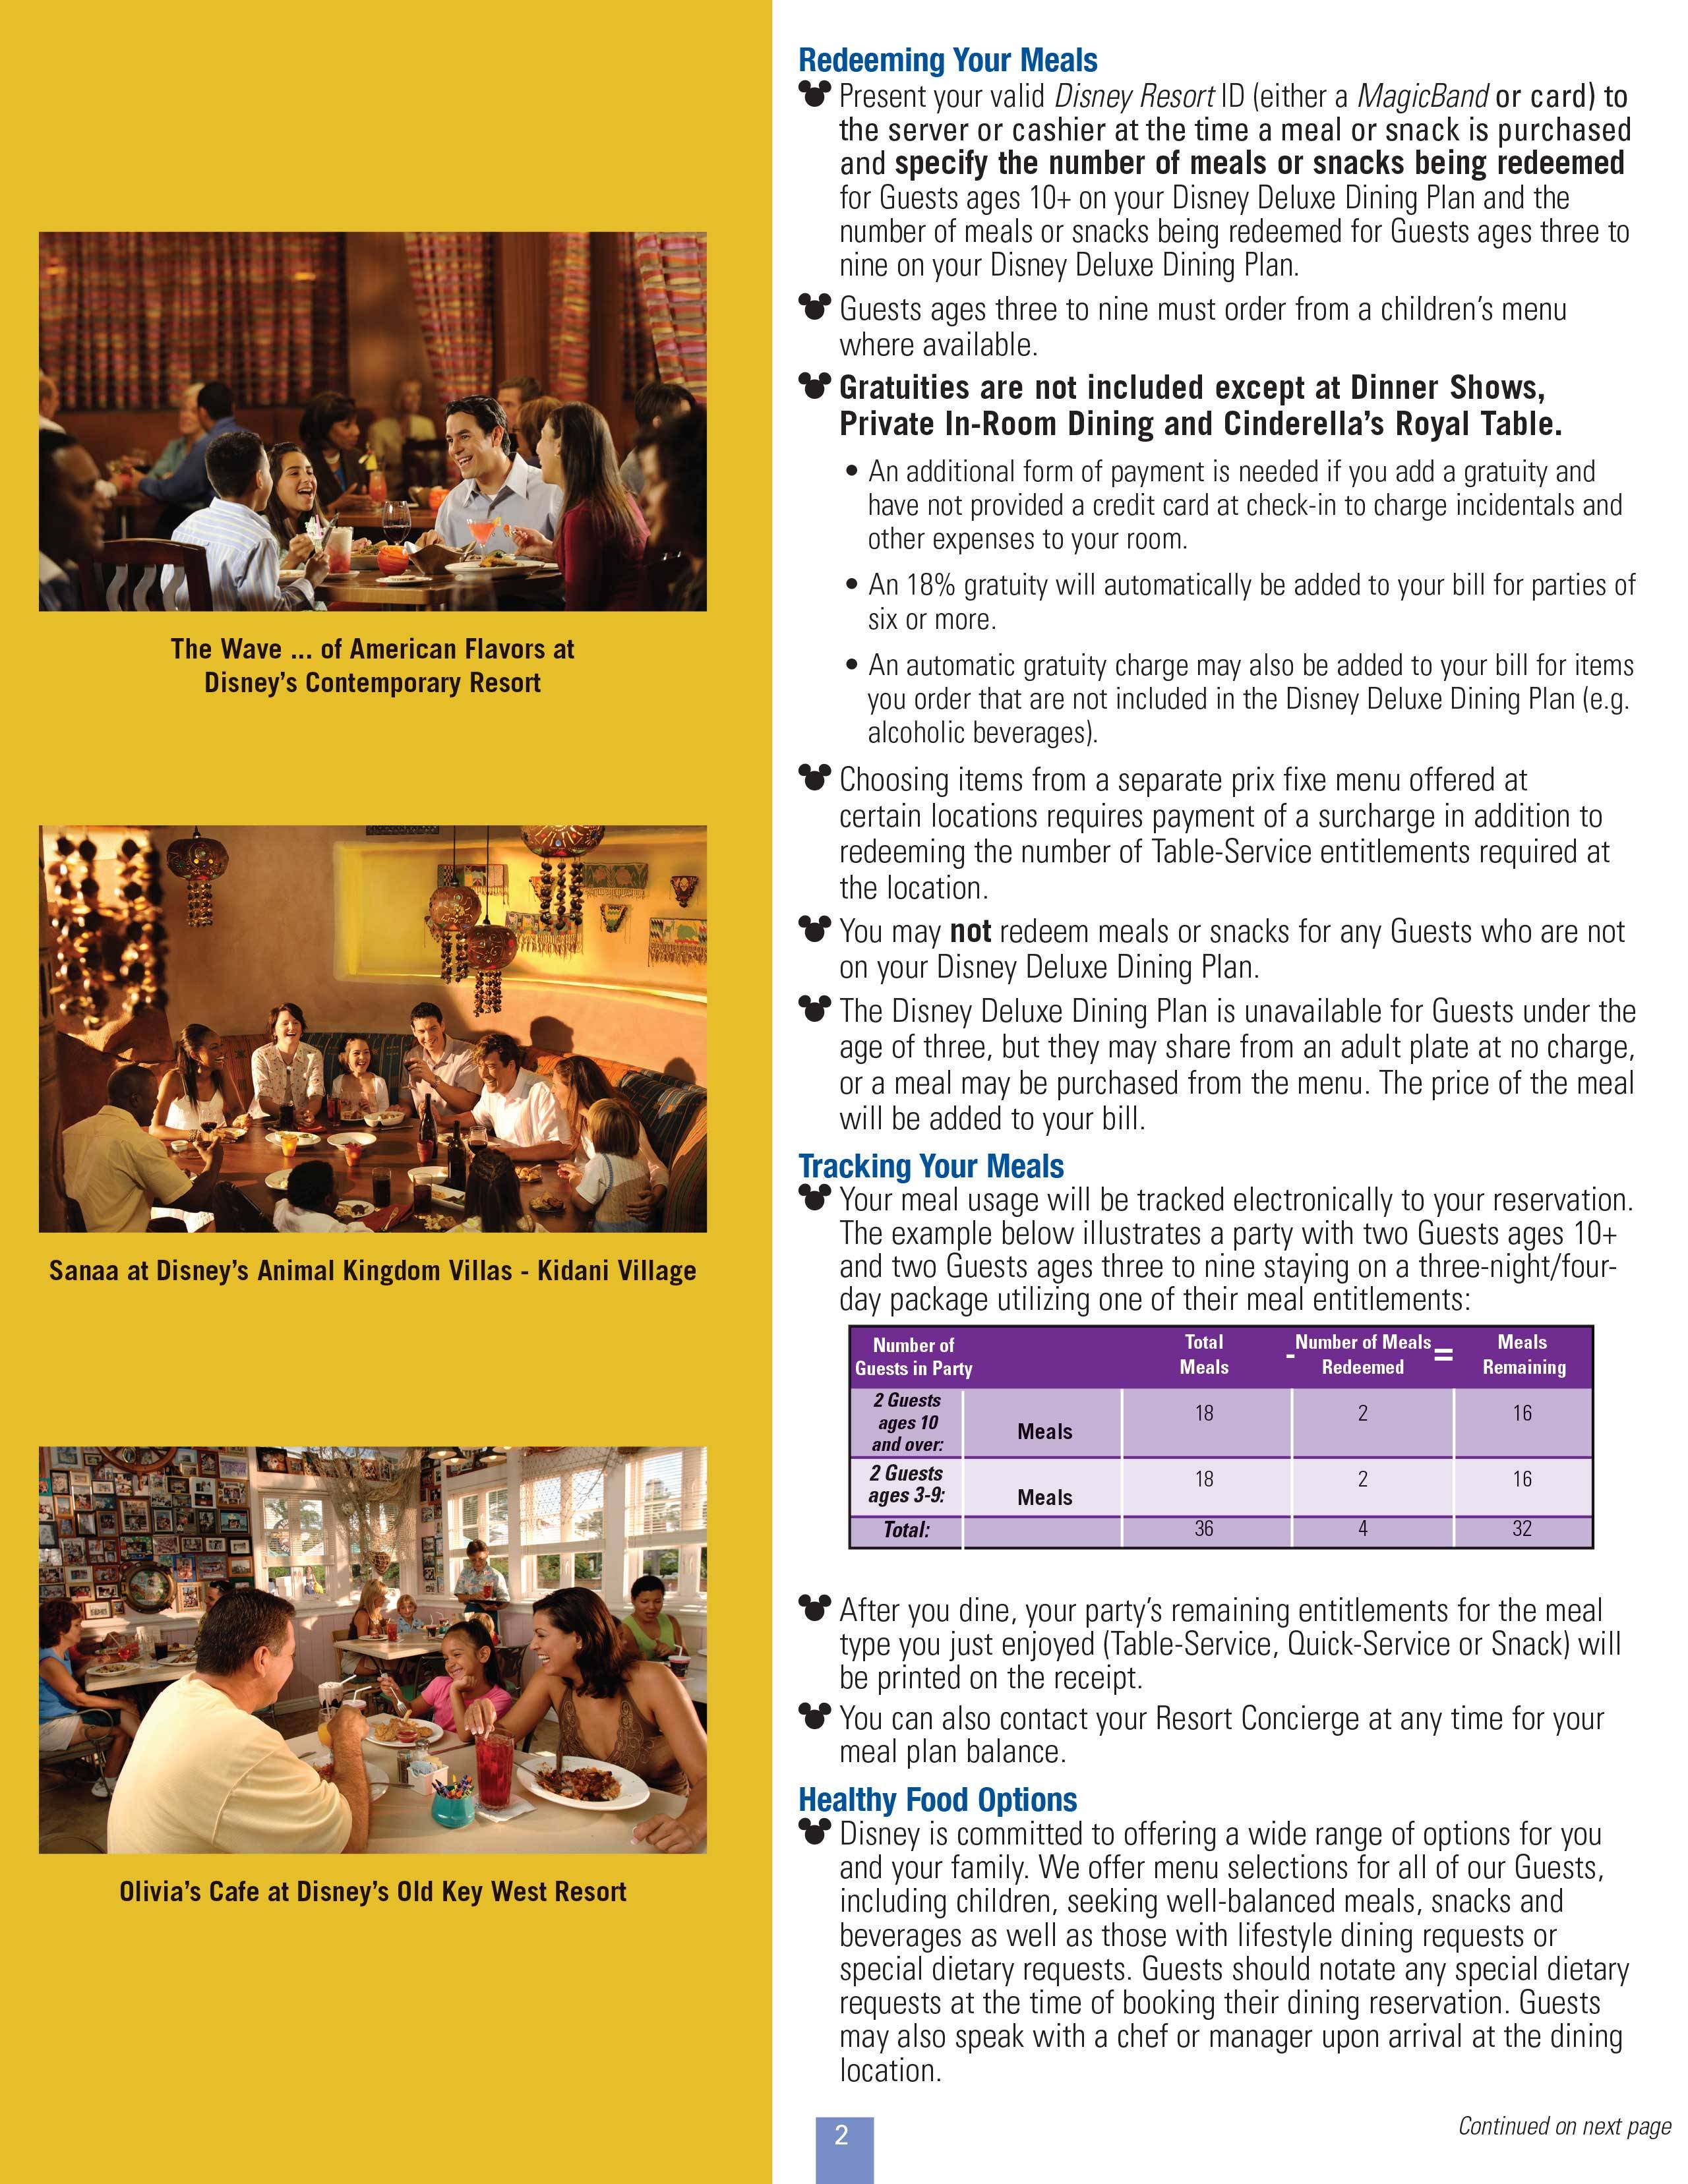 2015 Disney Deluxe Dining Plan brochure - Page 2